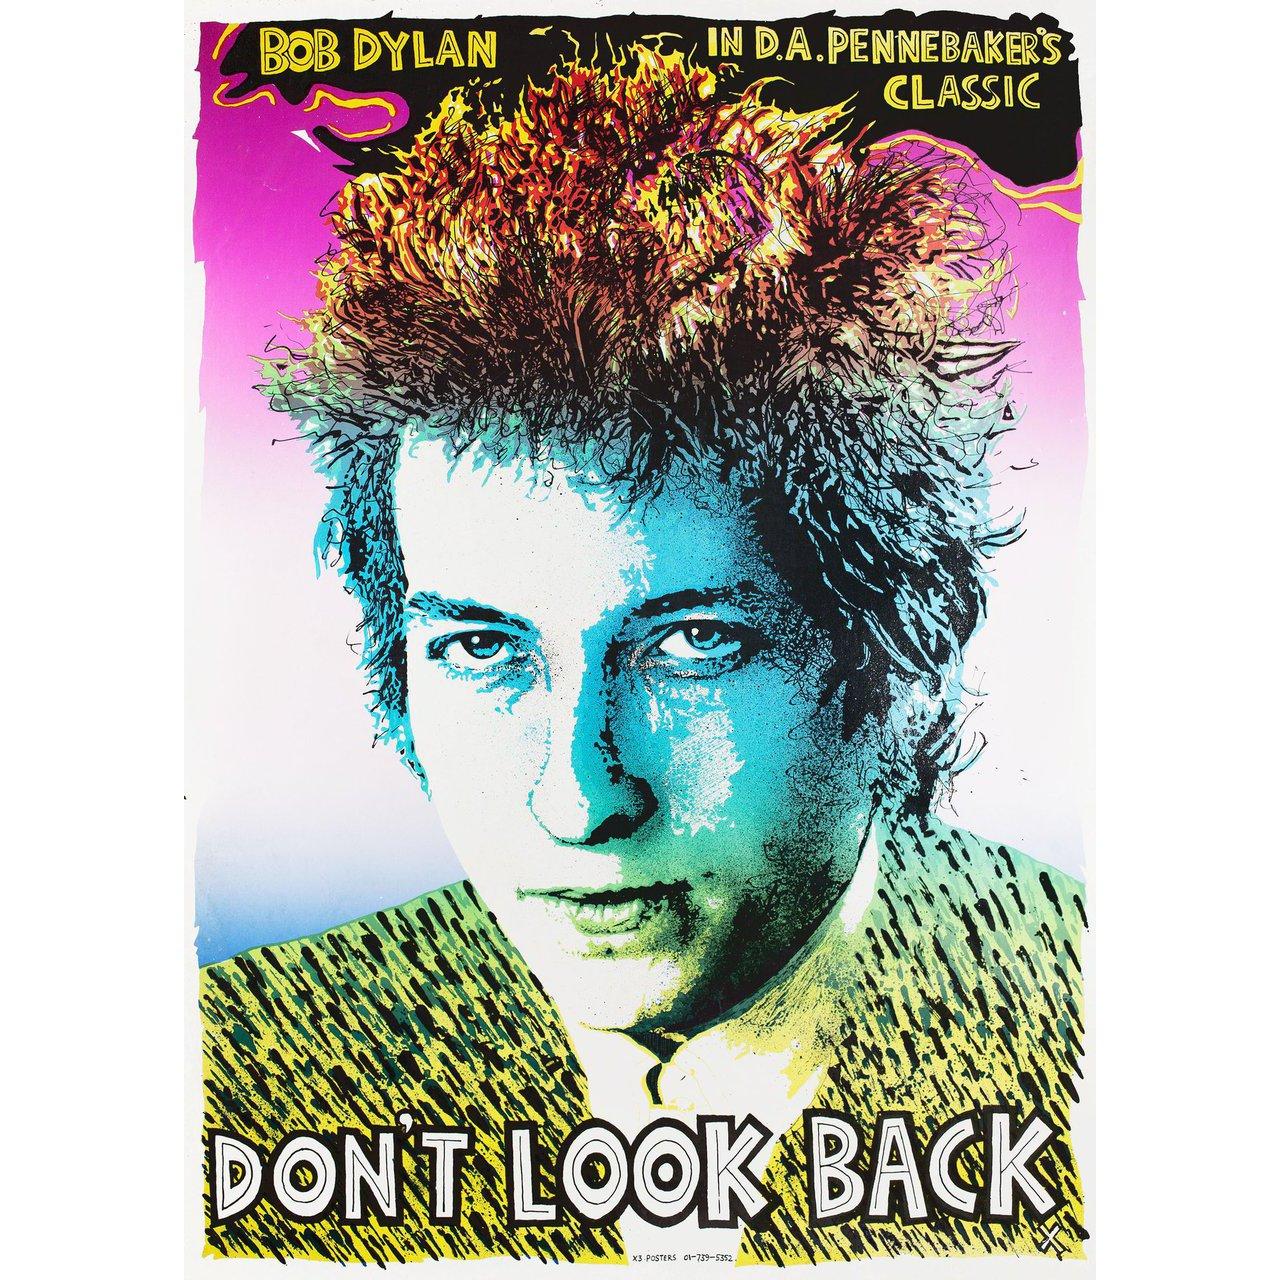 Original 1970s re-release British double crown poster by Bob Linney for the 1967 documentary film Don't Look Back directed by D.A. Pennebaker with Bob Dylan / Albert Grossman / Bob Neuwirth / Joan Baez. Fine condition, rolled. Please note: the size